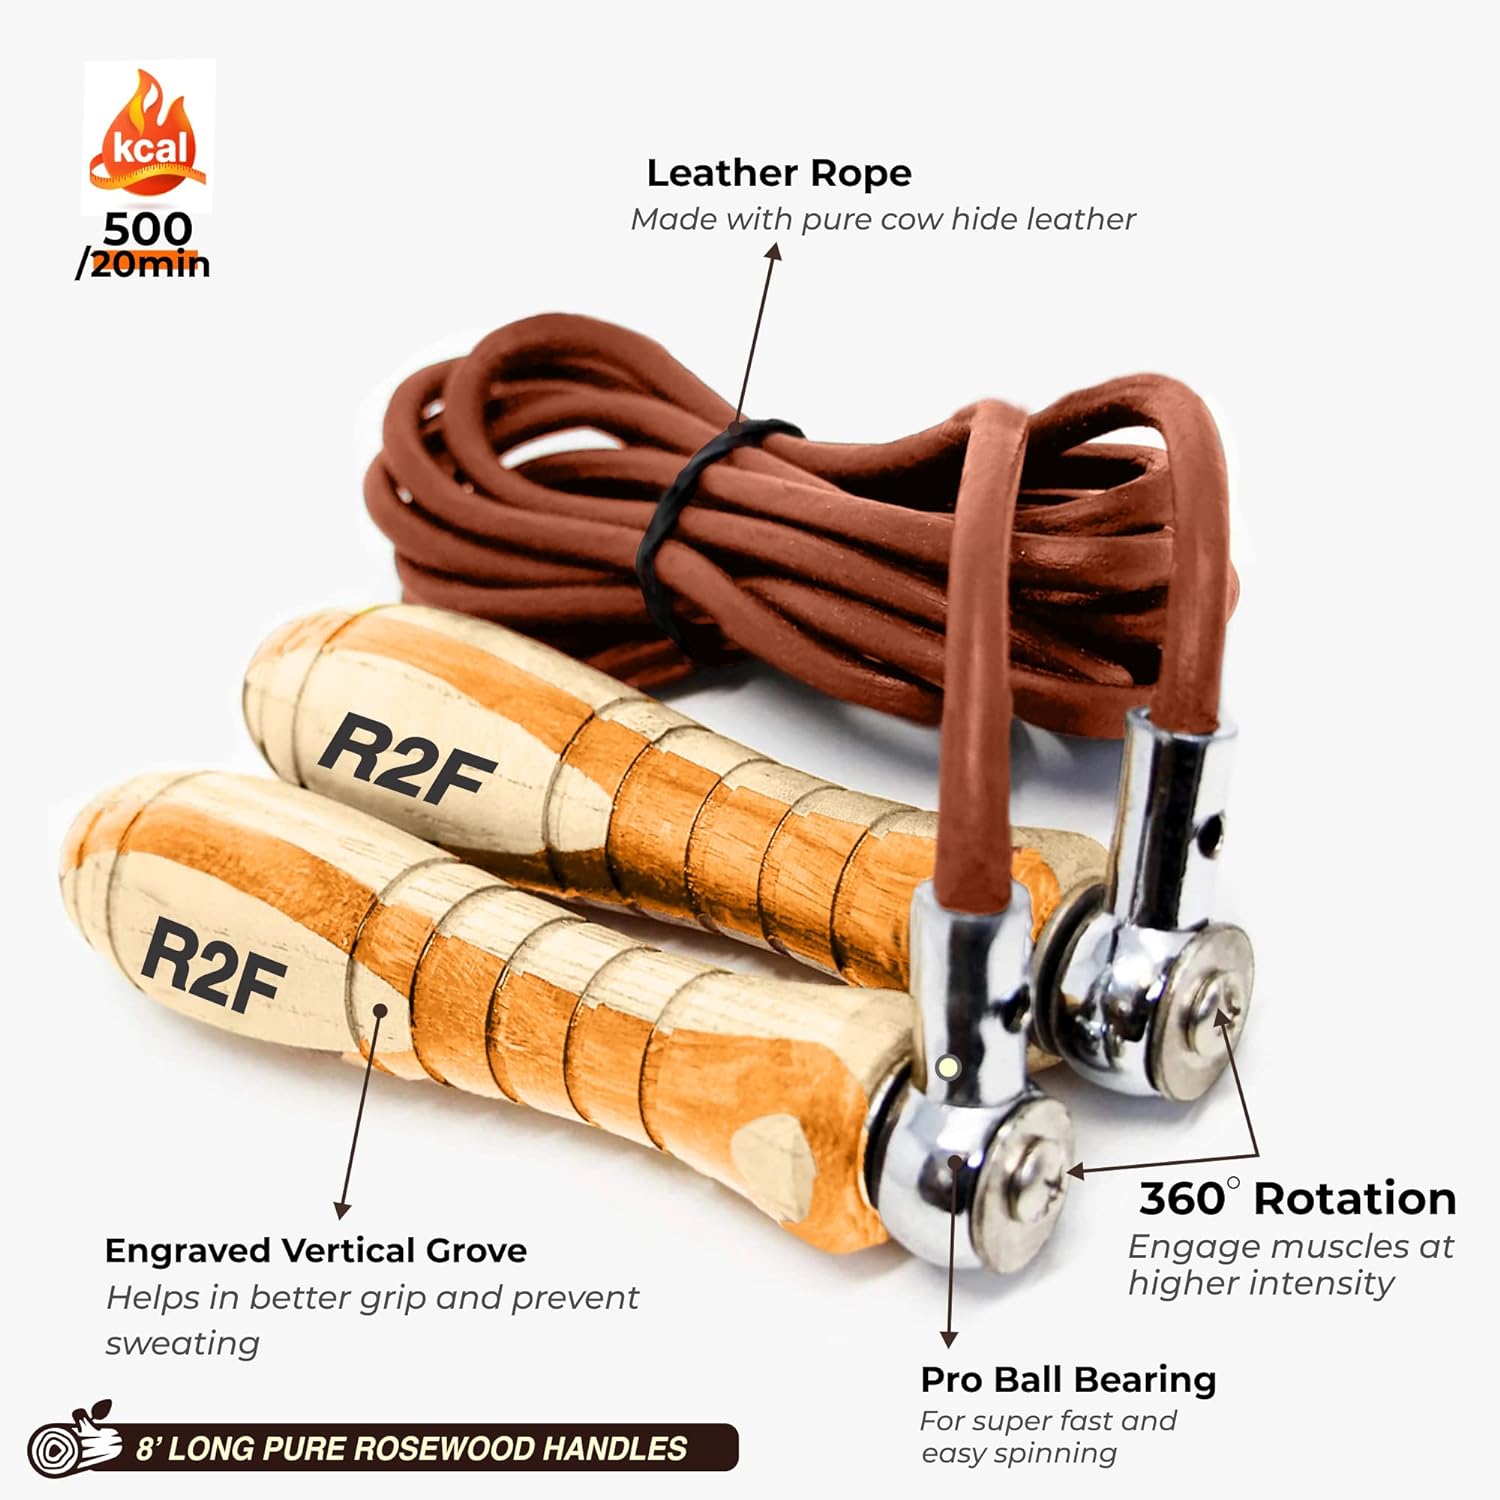 R2F Leather Skipping Rope is made of the finest leather that's stronger and more durable than cotton. At 9.3 feet in length, it provides a smooth, continuous motion when skipping and is perfect for improving coordination.